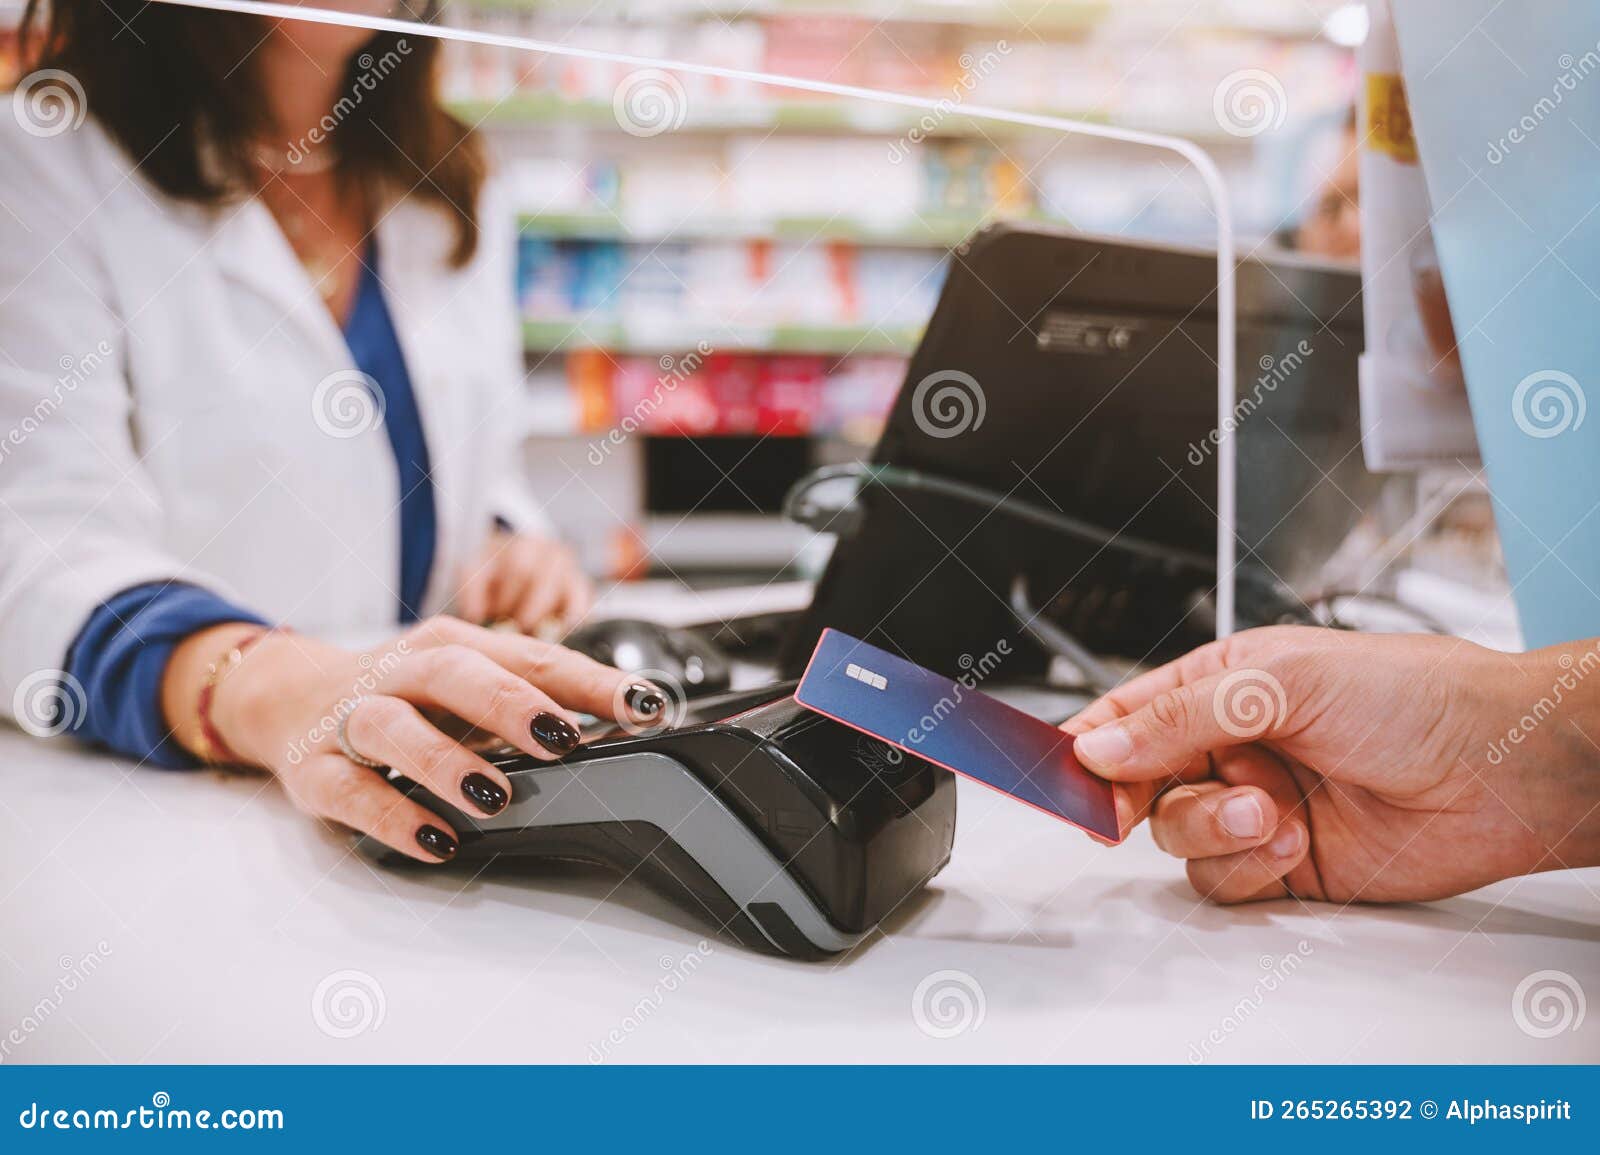 shop payment by contactless creditcard and pos in a store